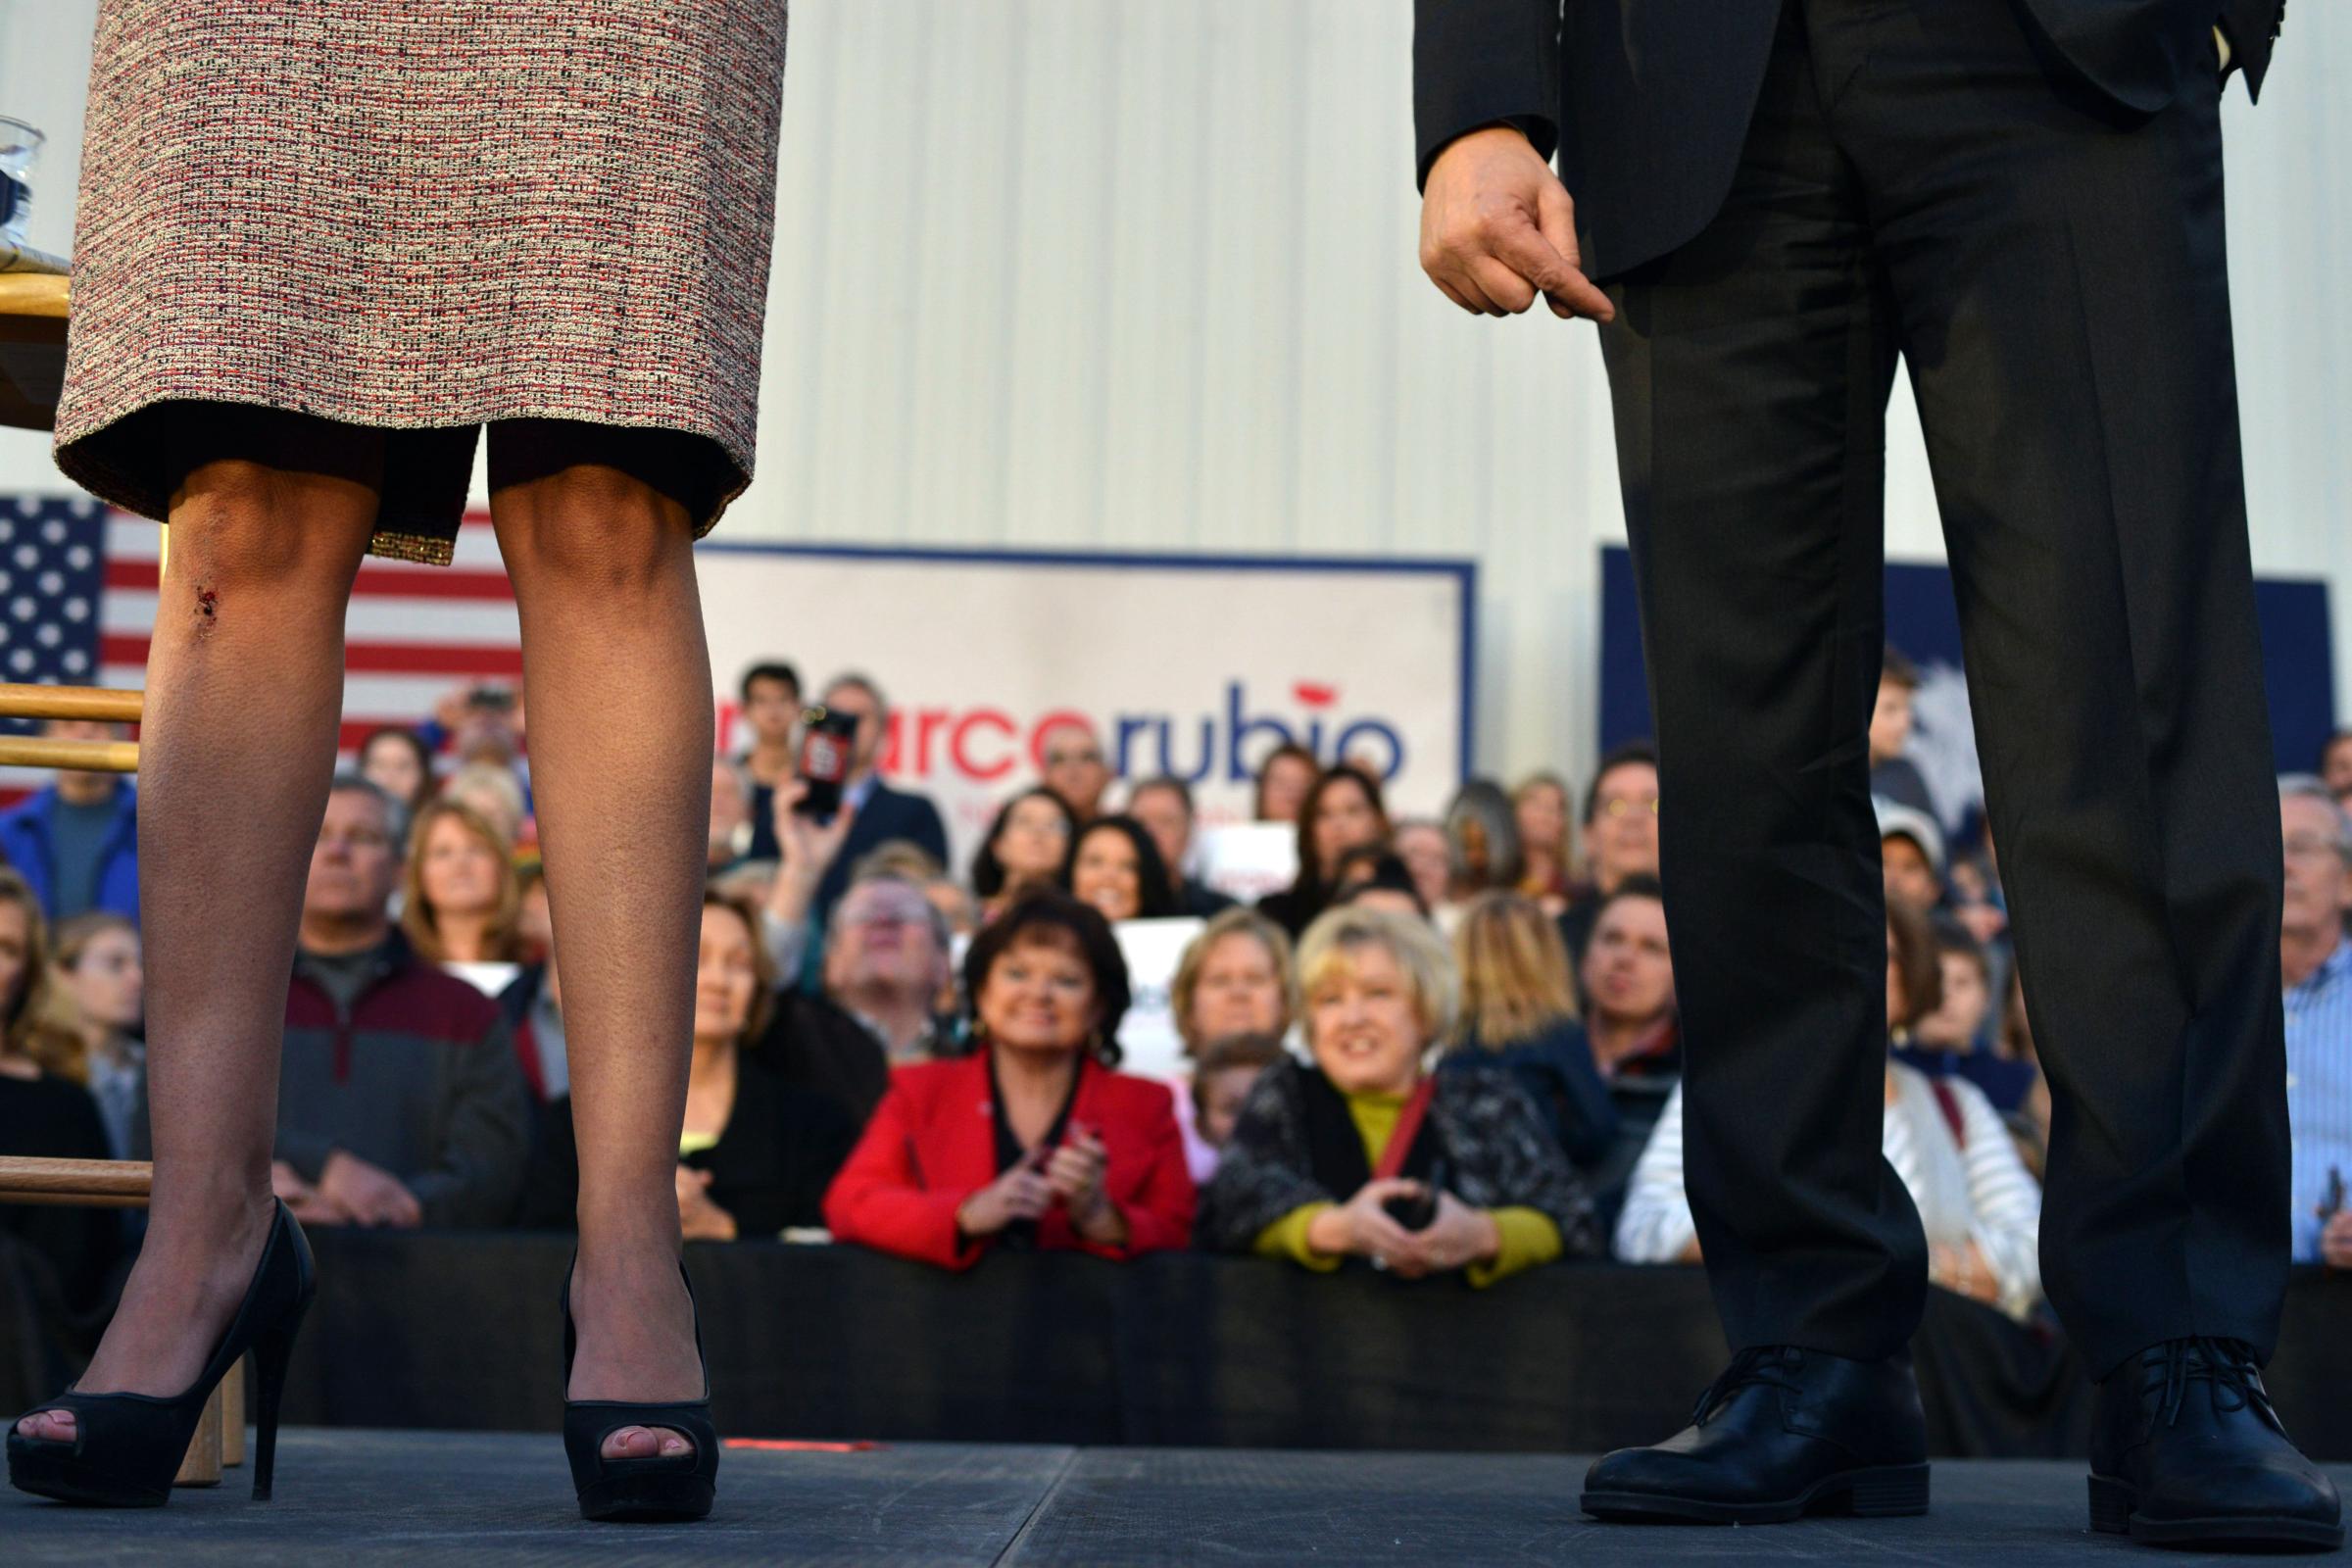 South Carolina Gov. Nikki Haley, left, formally endorses GOP presidential candidate Marco Rubio, right, at a rally in Chapin, S.C. on Feb. 17, 2016.